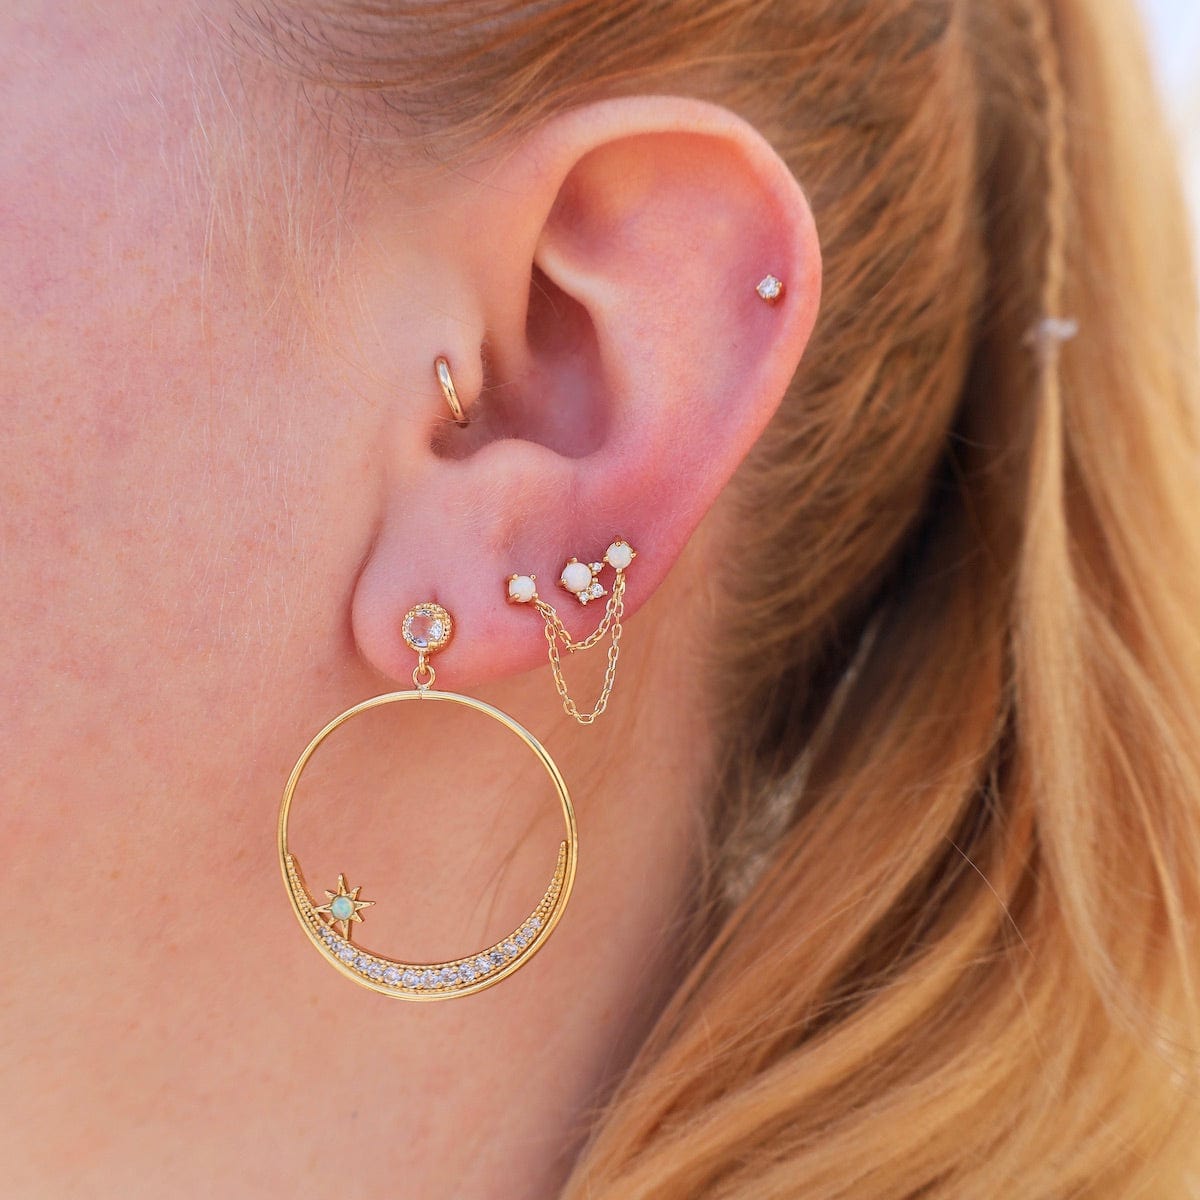 EAR-GPL Gold Plated Crescent CZ Moon & Opal Star Front Hoops